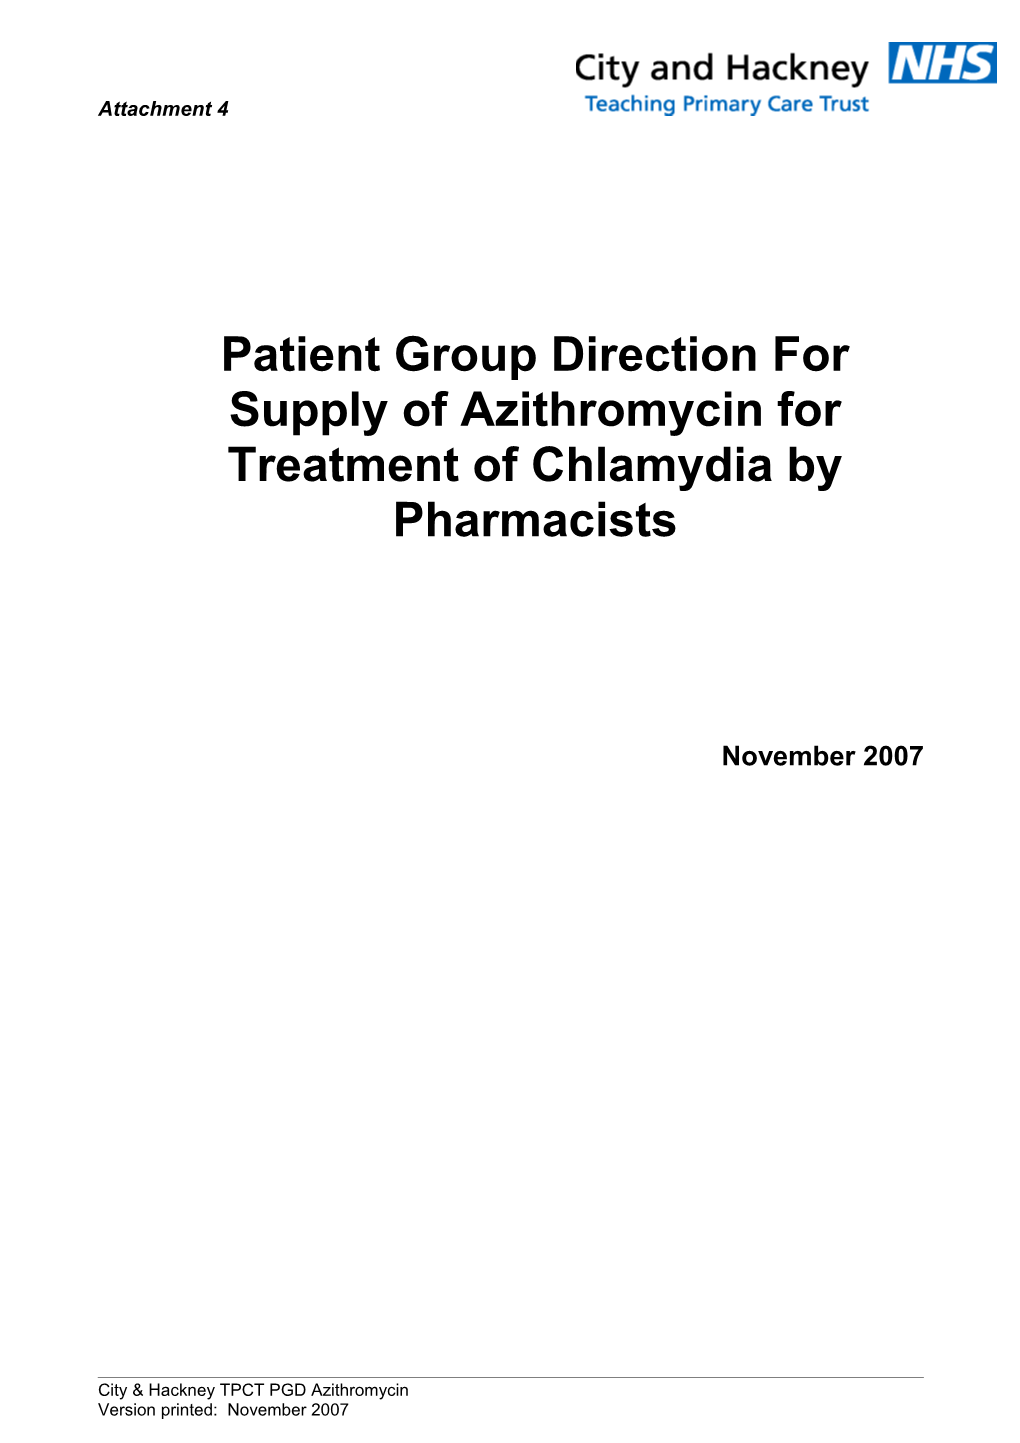 Patient Group Direction for Supply of Azithromycin for Treatment of Chlamydia by Pharmacists